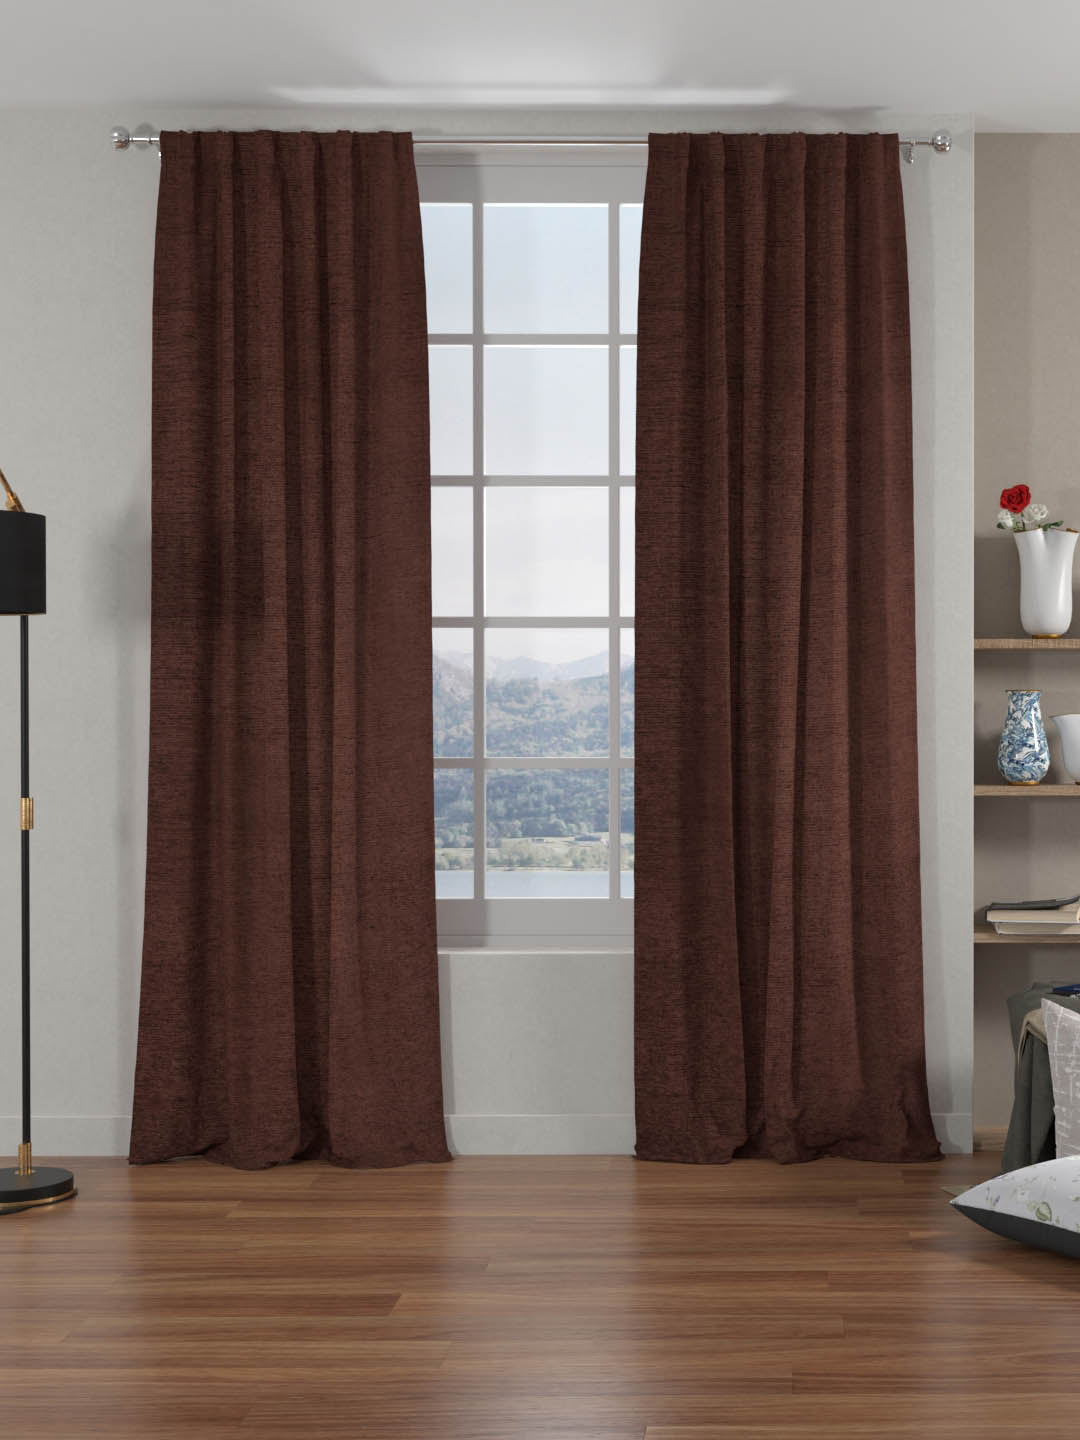 Grace Solids Opus 9 Ft Polyester Door Curtains Set Of 2 (Brown)